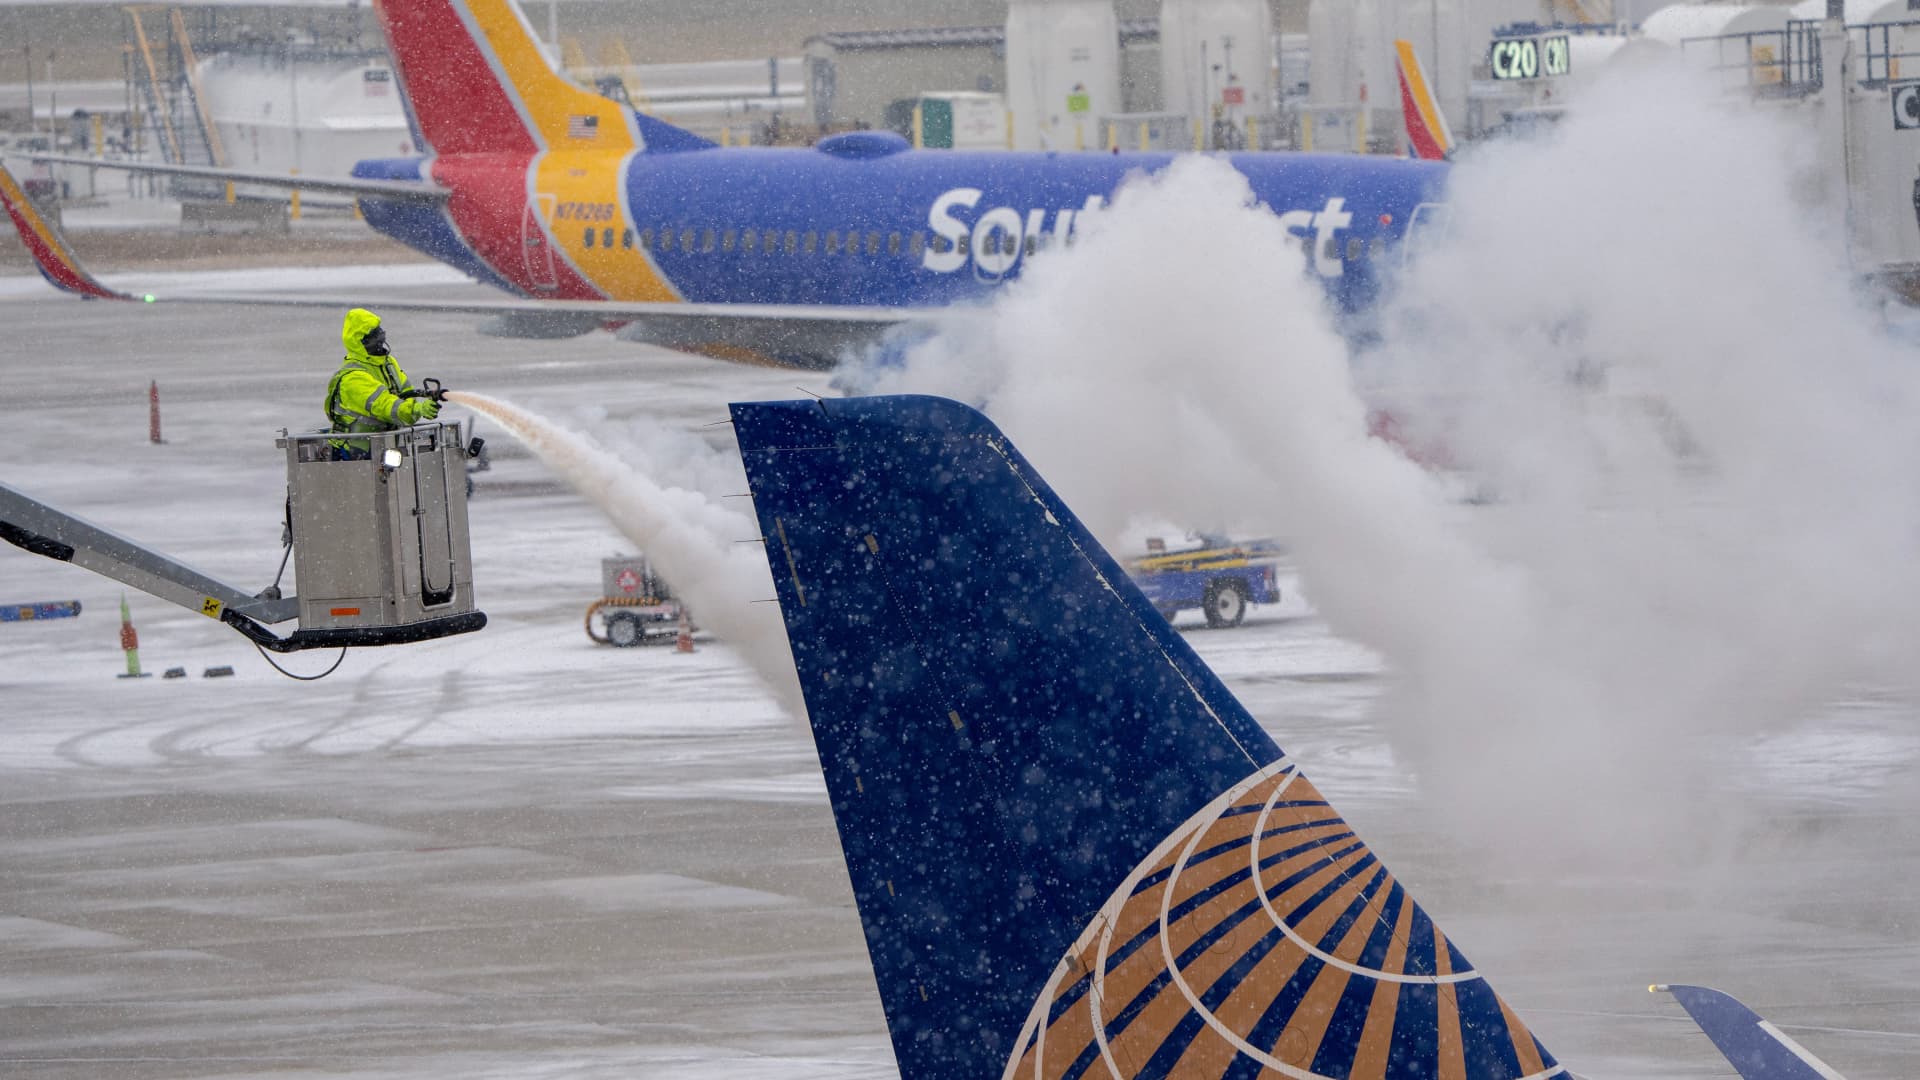 Airlines cancel 17,000 flights due to severe winter weather but disruptions ease